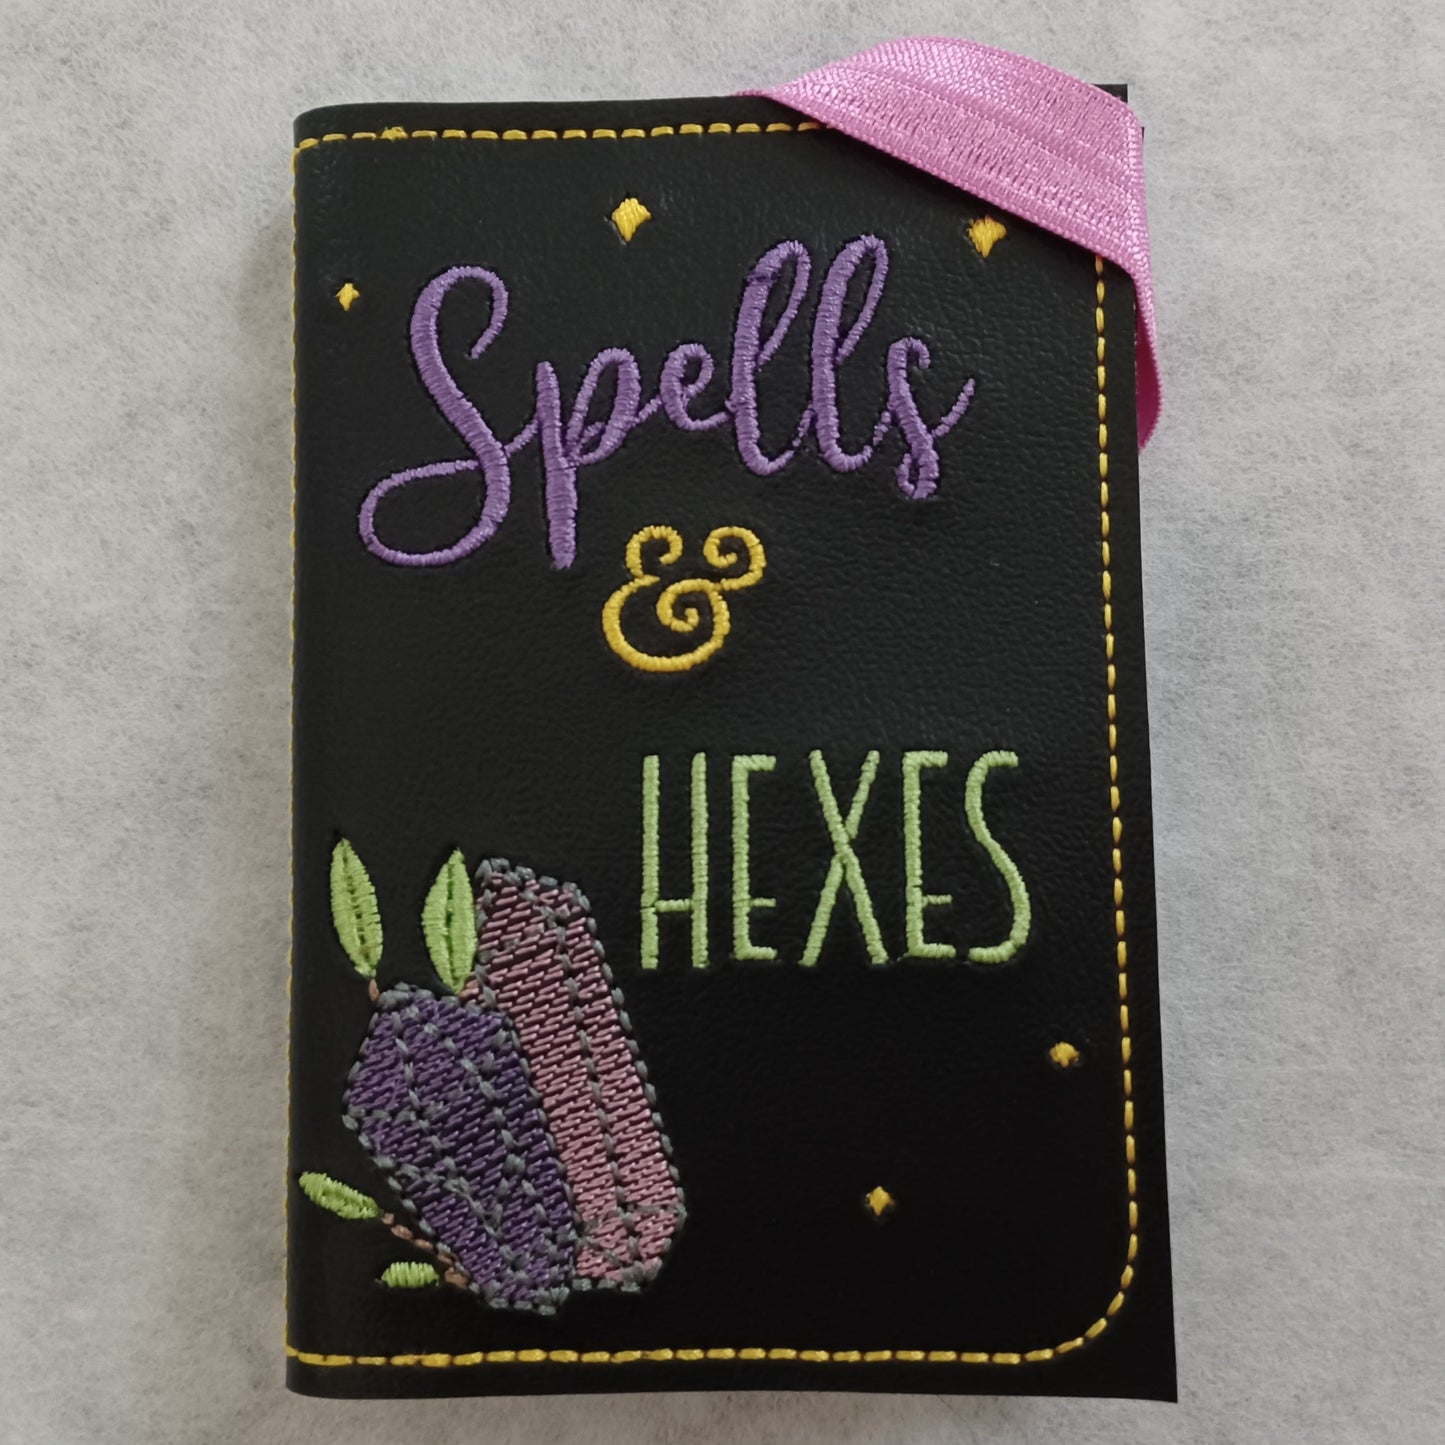 Spells & Hexes Embroidered Notebook Cover